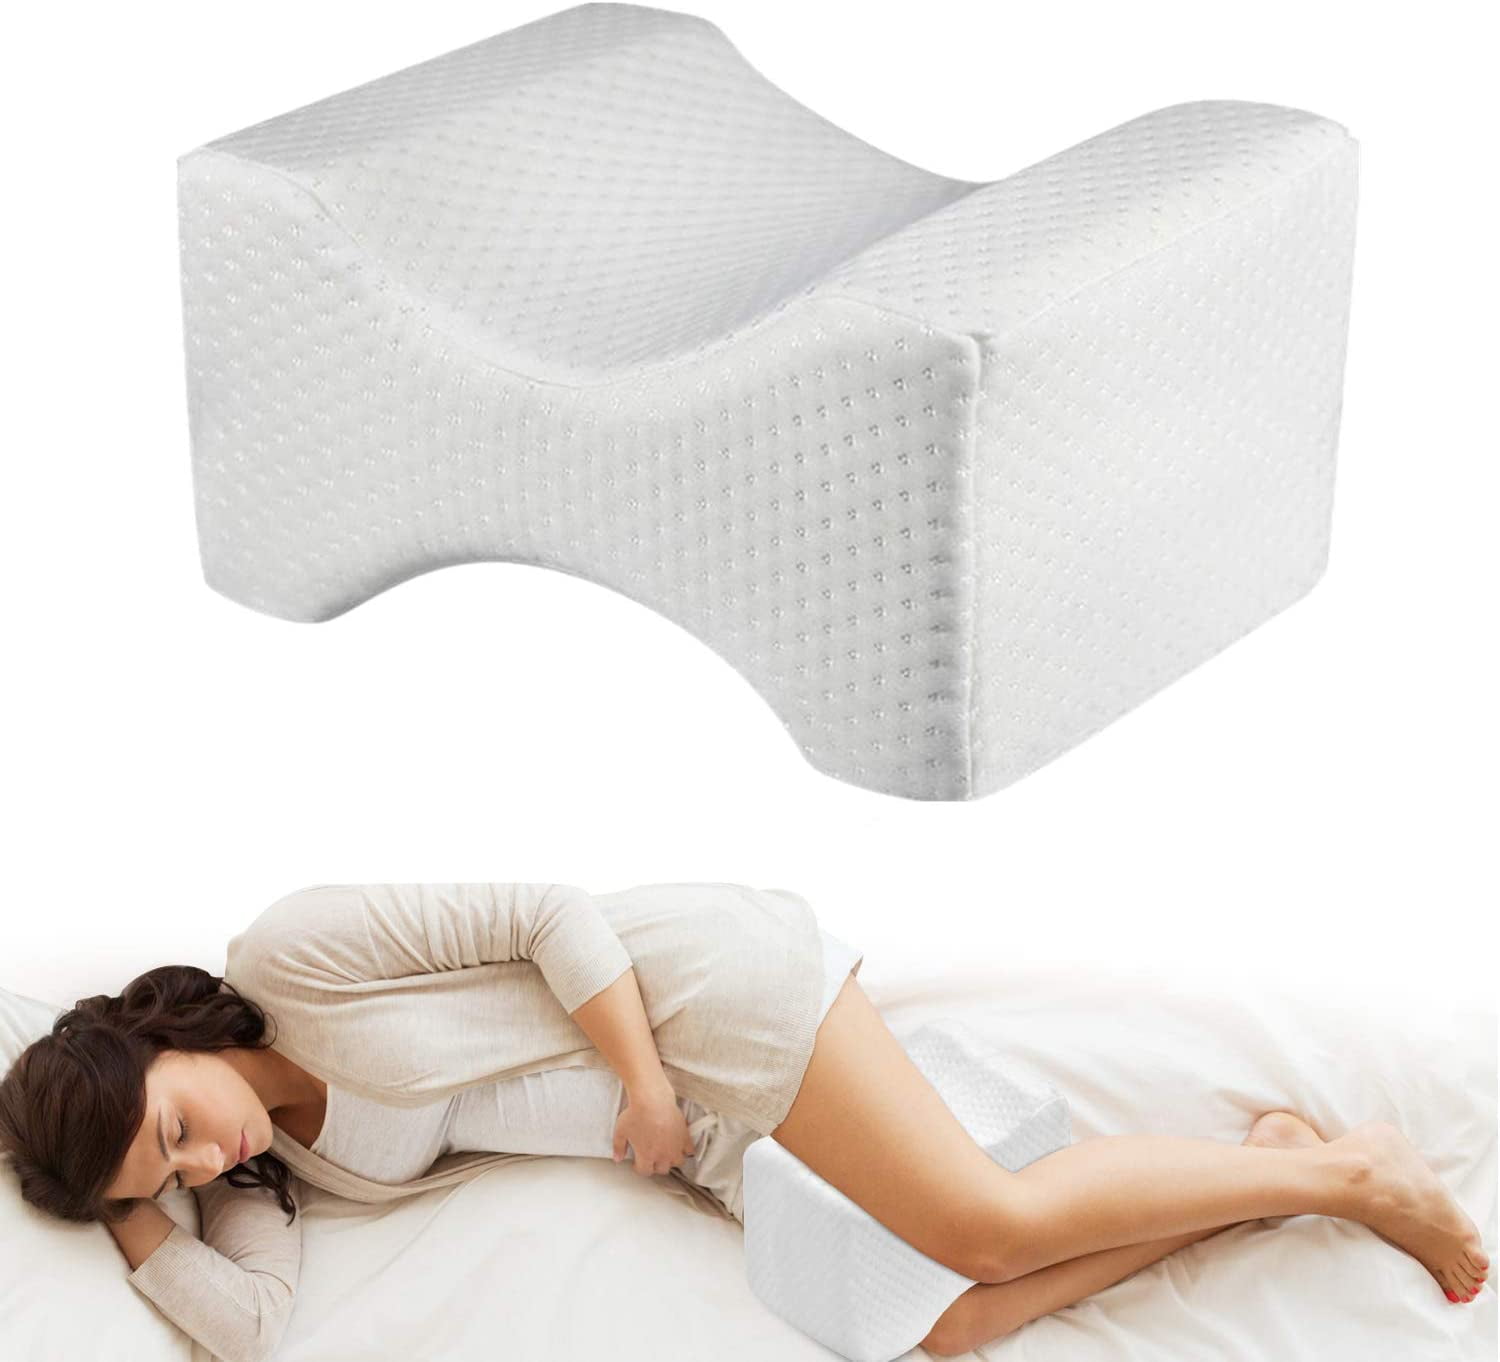 Back and Knee Pain- Leg Pillow Memory Foam Wedge Contour Leg Pillow with Washable Cover Knee Pillow Best for Lower Leg 